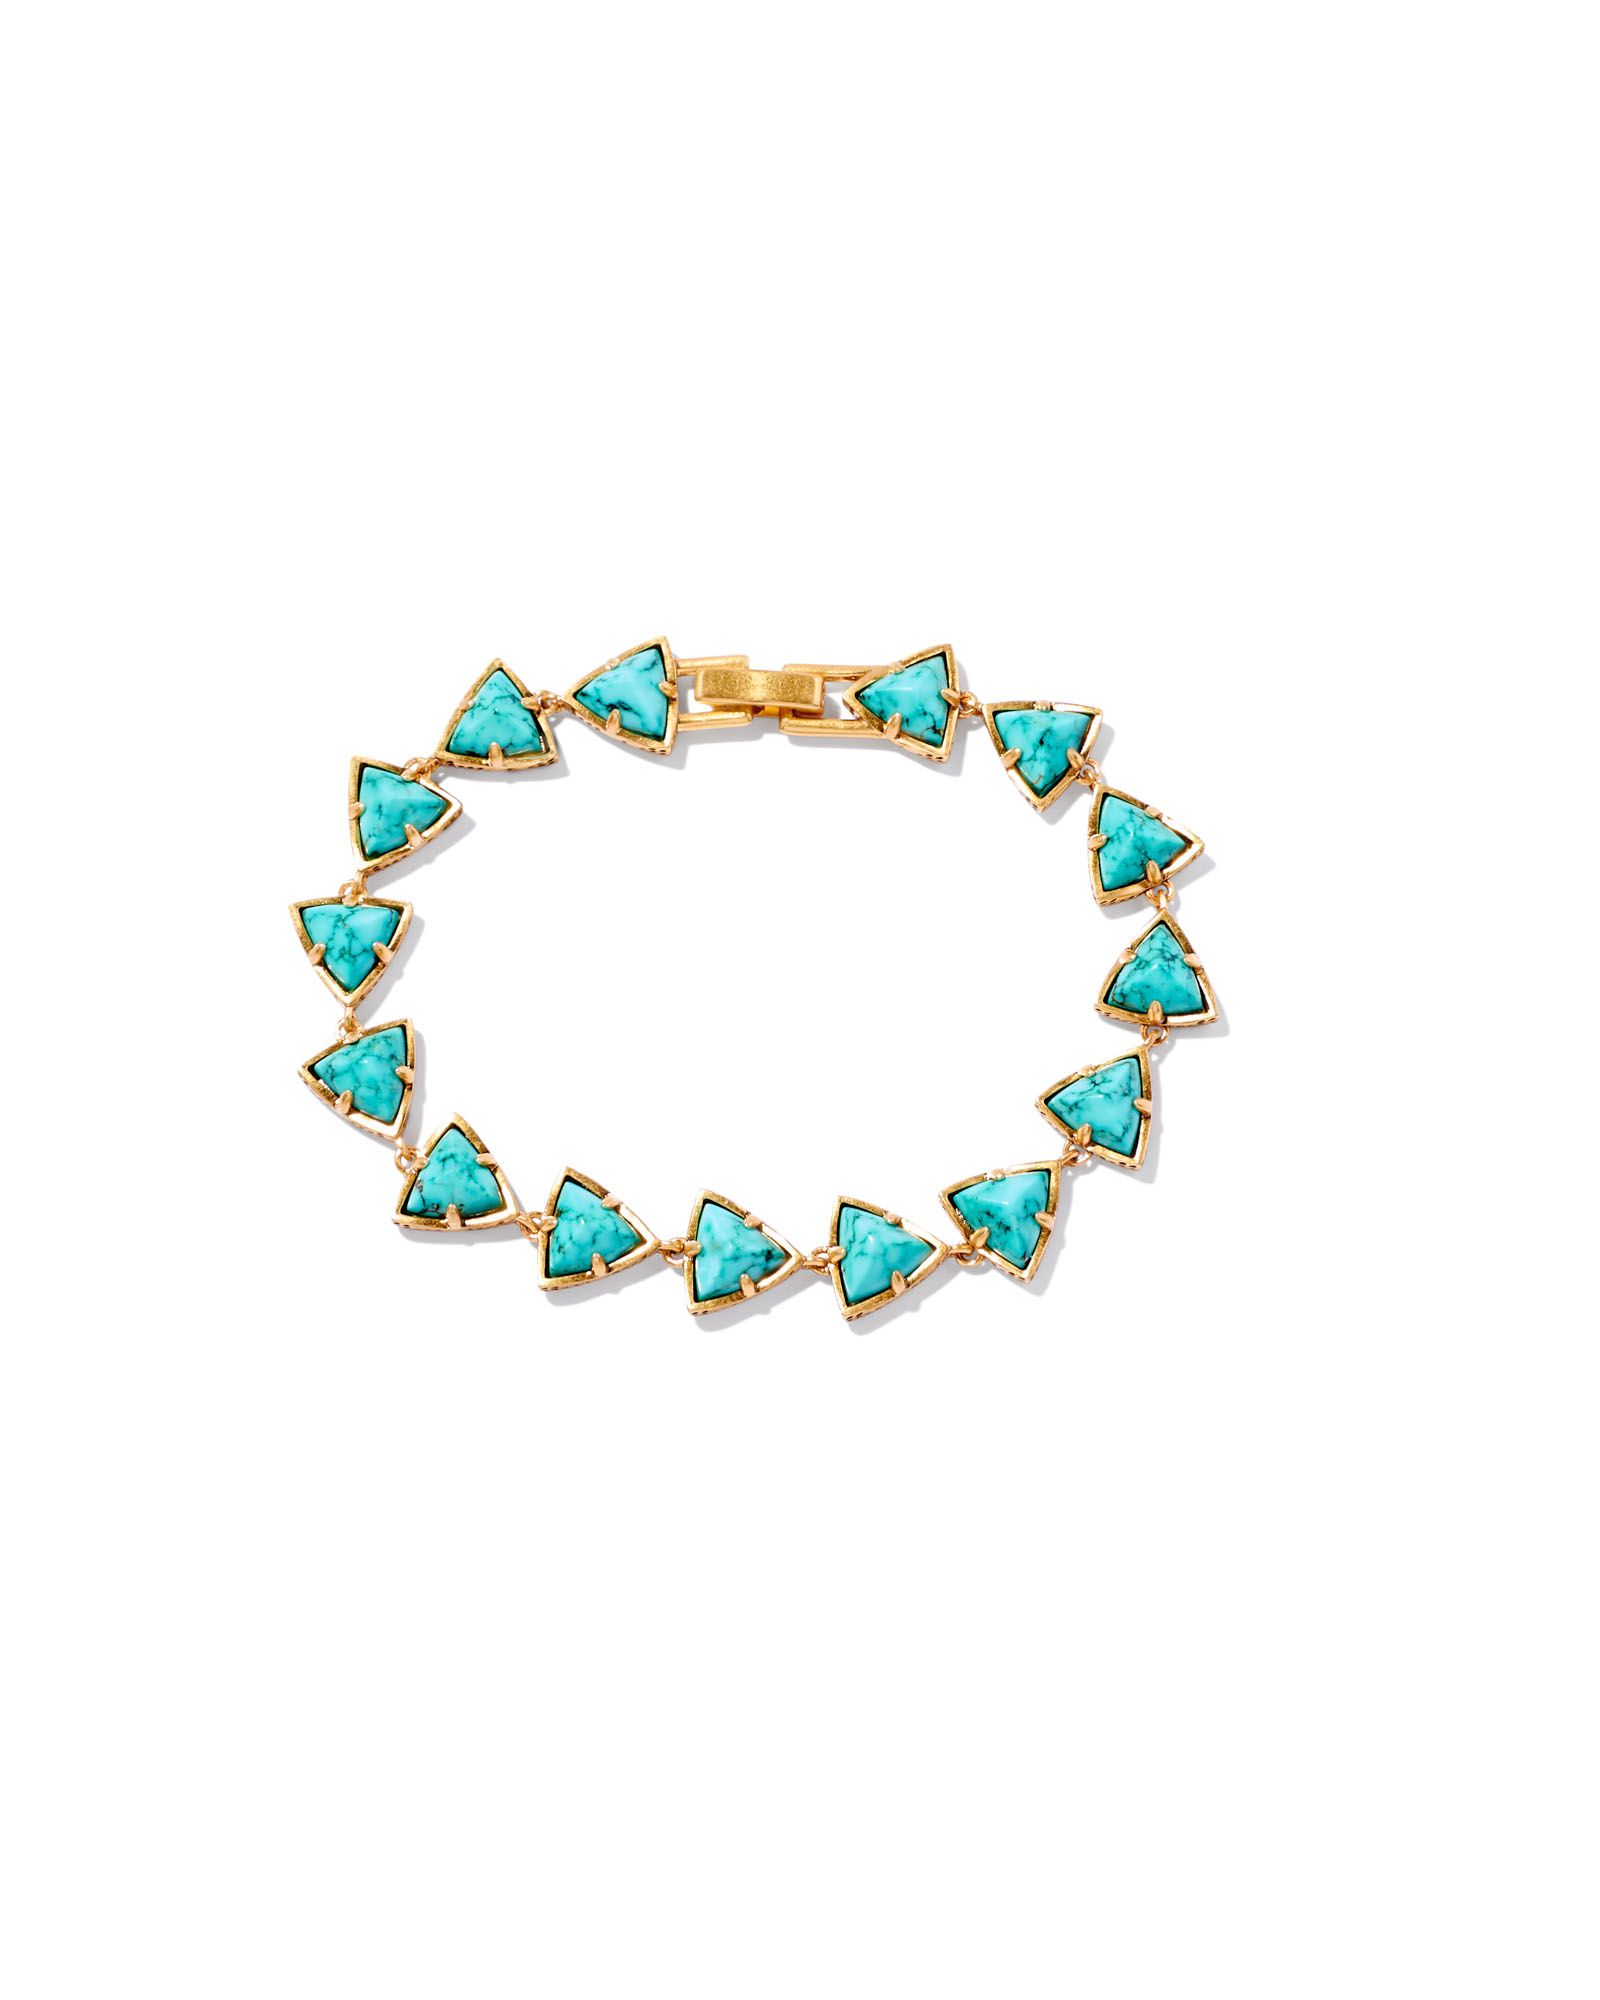 Robby Vintage Gold Link and Chain Bracelet in Variegated Turquoise Magnesite | Kendra Scott